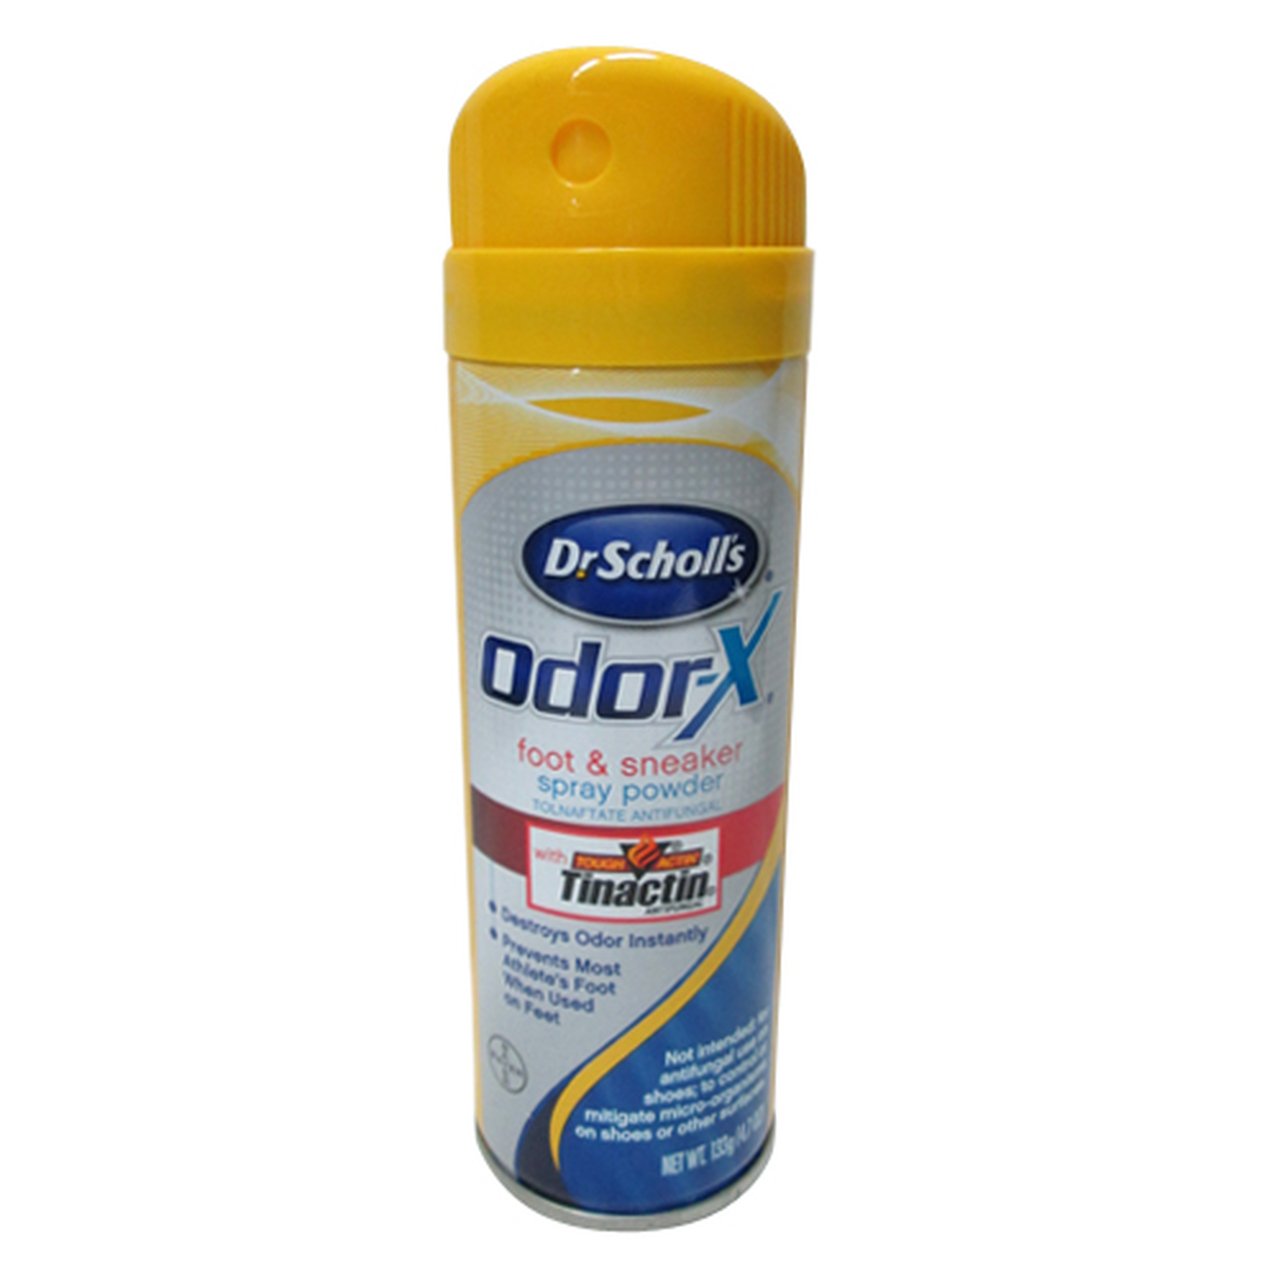 Any time I take off shoes, I spray the inside with this and always wear clean socks. Working okay so far to cut down on foot smell.